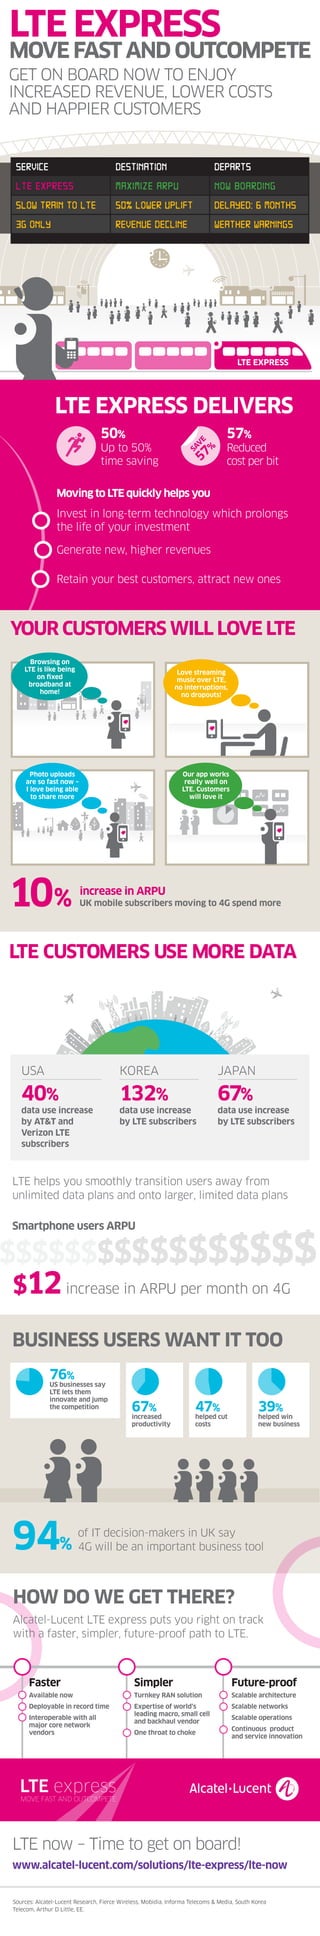 LTE now – Time to get on board!
www.alcatel-lucent.com/solutions/lte-express/lte-now
GET ON BOARD NOW TO ENJOY
INCREASED REVENUE, LOWER COSTS
AND HAPPIER CUSTOMERS
LTE EXPRESS
MOVE FAST AND OUTCOMPETE
Sources: Alcatel-Lucent Research, Fierce Wireless, Mobidia, Informa Telecoms & Media, South Korea
Telecom, Arthur D Little, EE.
LTE EXPRESS DELIVERS
Moving to LTE quickly helps you
50%
Up to 50%
time saving
Invest in long-term technology which prolongs
the life of your investment
Generate new, higher revenues
Retain your best customers, attract new ones
57%
Reduced
cost per bit
YOUR CUSTOMERS WILL LOVE LTE
LTE CUSTOMERS USE MORE DATA
BUSINESS USERS WANT IT TOO
HOW DO WE GET THERE?
Browsing on
LTE is like being
on fixed
broadband at
home!
Love streaming
music over LTE,
no interruptions,
no dropouts!
10% increase in ARPU
UK mobile subscribers moving to 4G spend more
76%
US businesses say
LTE lets them
innovate and jump
the competition 67%
increased
productivity
47%
helped cut
costs
39%
helped win
new business
94%
of IT decision-makers in UK say
4G will be an important business tool
Alcatel-Lucent LTE express puts you right on track
with a faster, simpler, future-proof path to LTE.
Faster
Available now
Deployable in record time
Interoperable with all
major core network
vendors
Simpler
Turnkey RAN solution
Expertise of world’s
leading macro, small cell
and backhaul vendor
One throat to choke
Future-proof
Scalable architecture
Scalable networks
Scalable operations
Continuous product
and service innovation
LTE EXPRESS
Photo uploads
are so fast now –
I love being able
to share more
LTE helps you smoothly transition users away from
unlimited data plans and onto larger, limited data plans
USA
40%
data use increase
by AT&T and
Verizon LTE
subscribers
JAPAN
67%
data use increase
by LTE subscribers
KOREA
132%
data use increase
by LTE subscribers
$$$$$$$$$$$$$$$$$
Smartphone users ARPU
$12increase in ARPU per month on 4G
Our app works
really well on
LTE. Customers
will love it
 